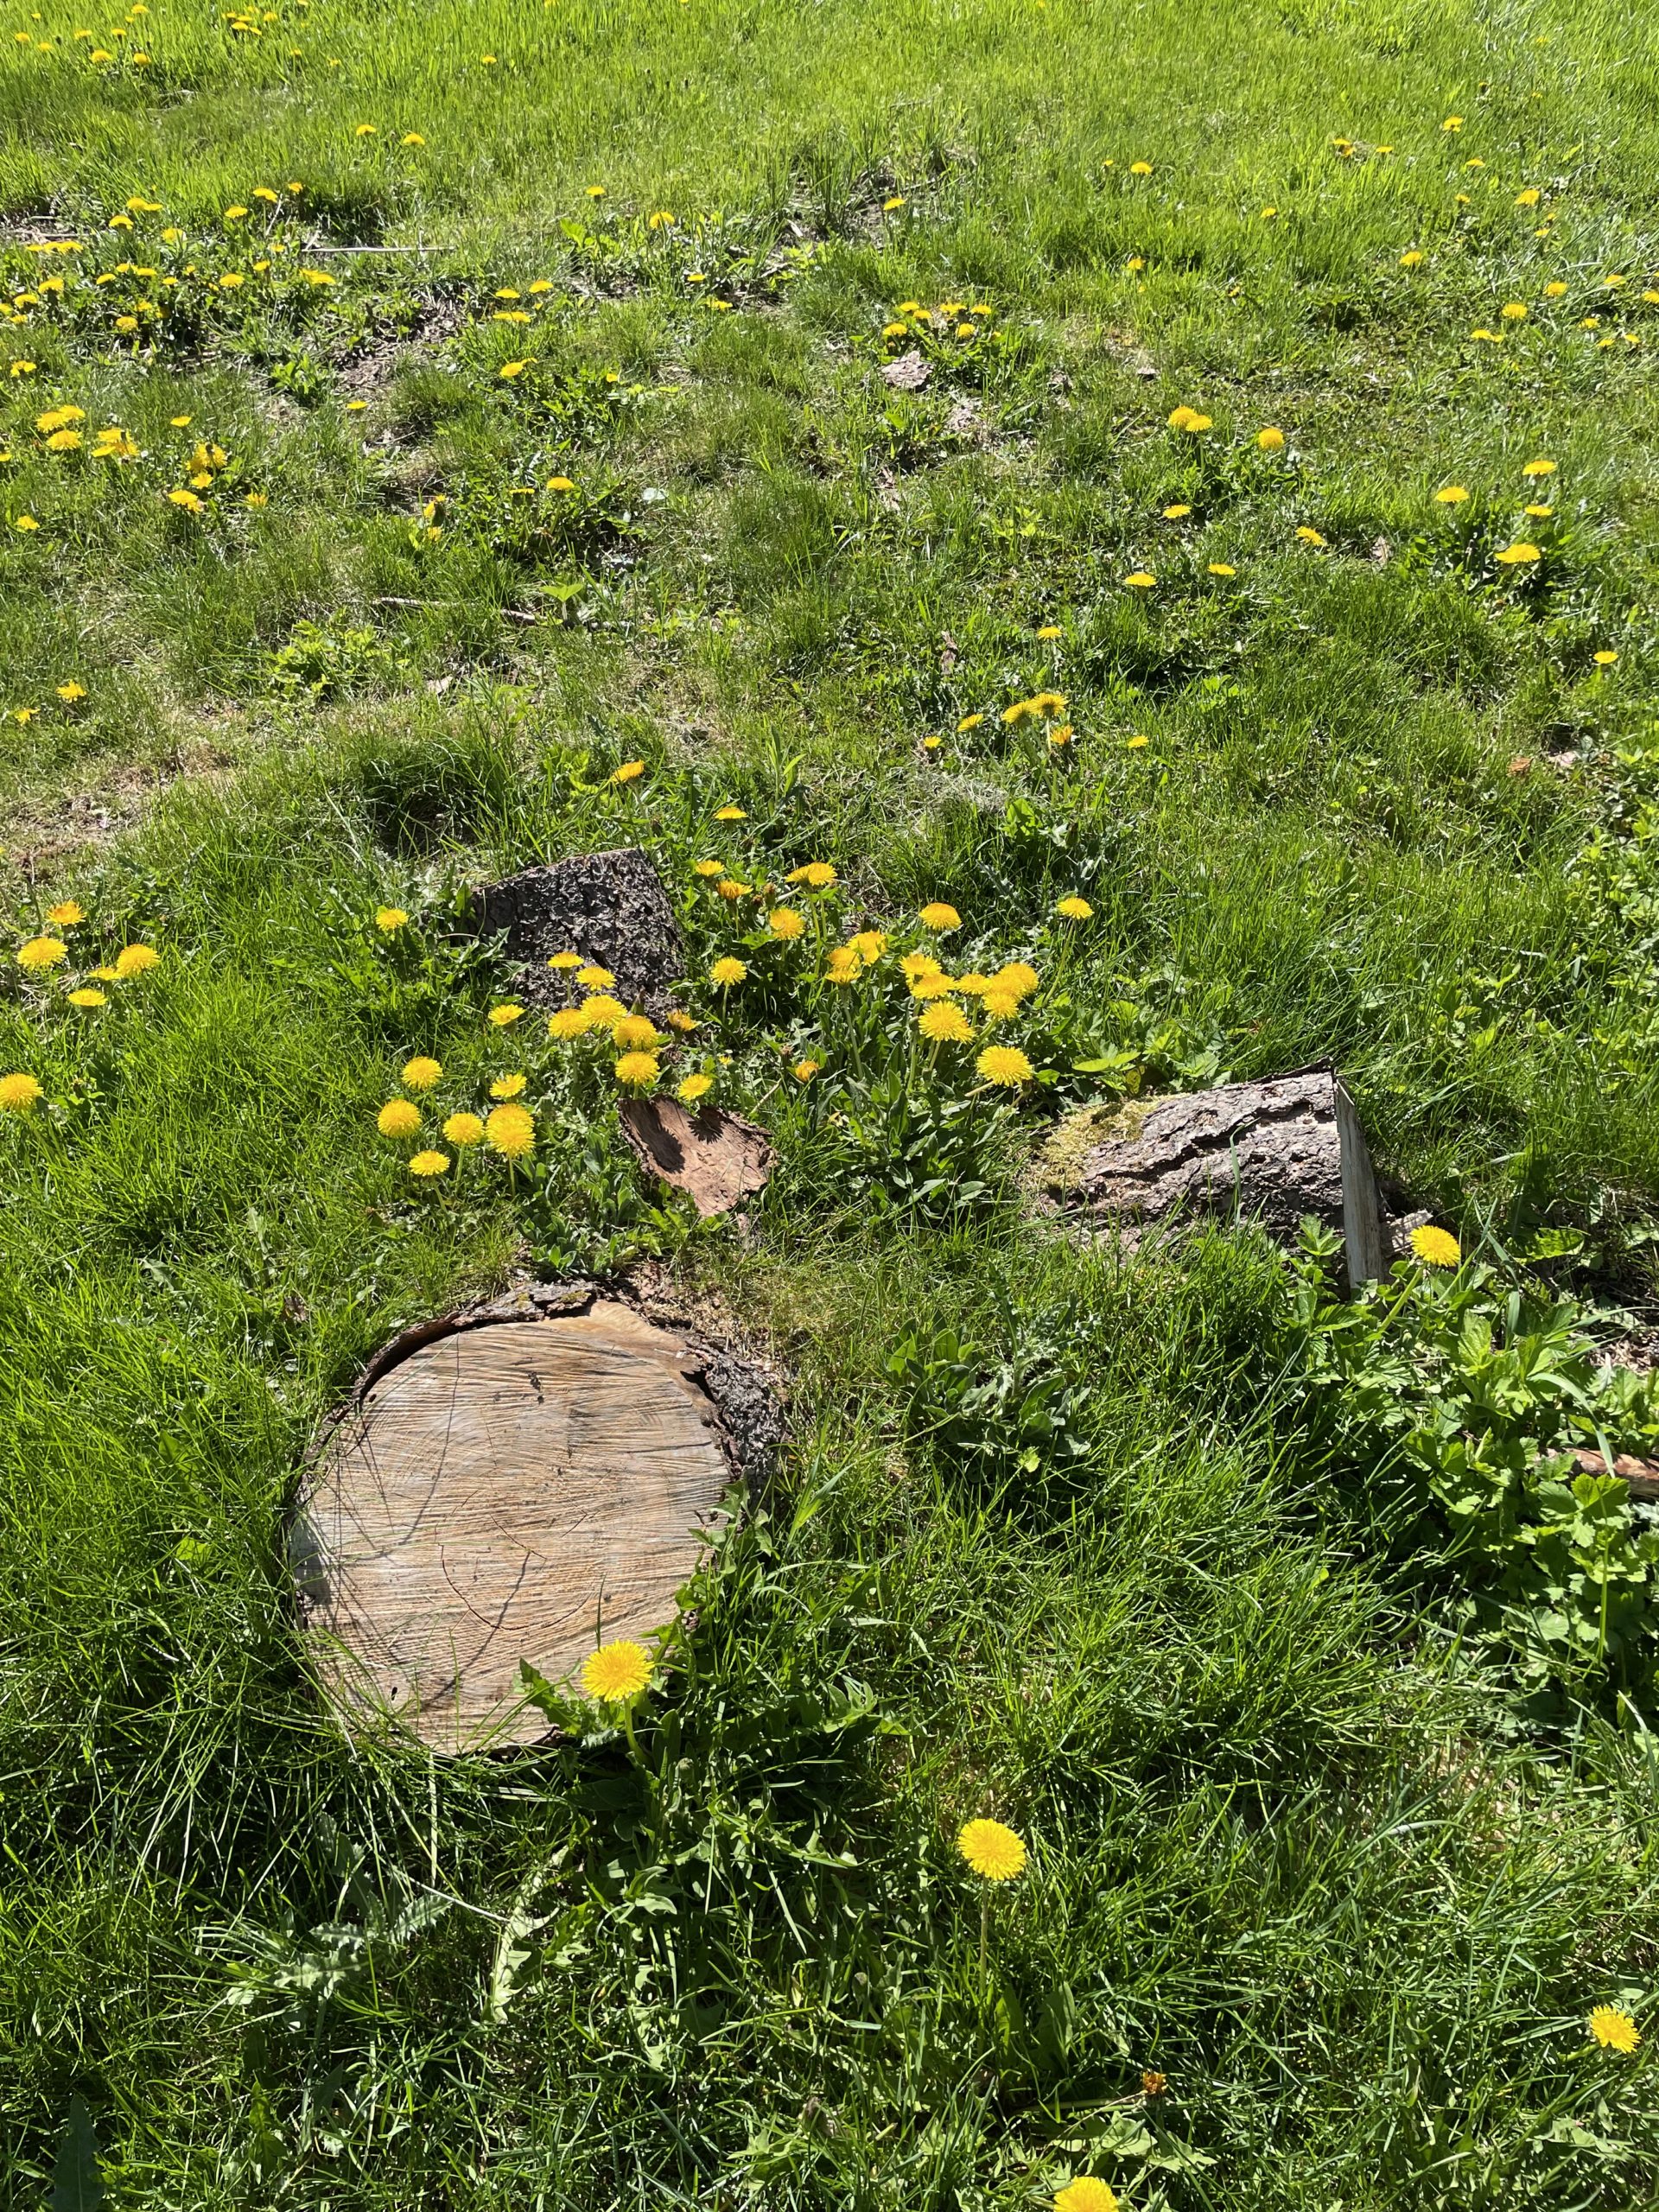 colour photo of tree stumps with dandelions blooming nearby